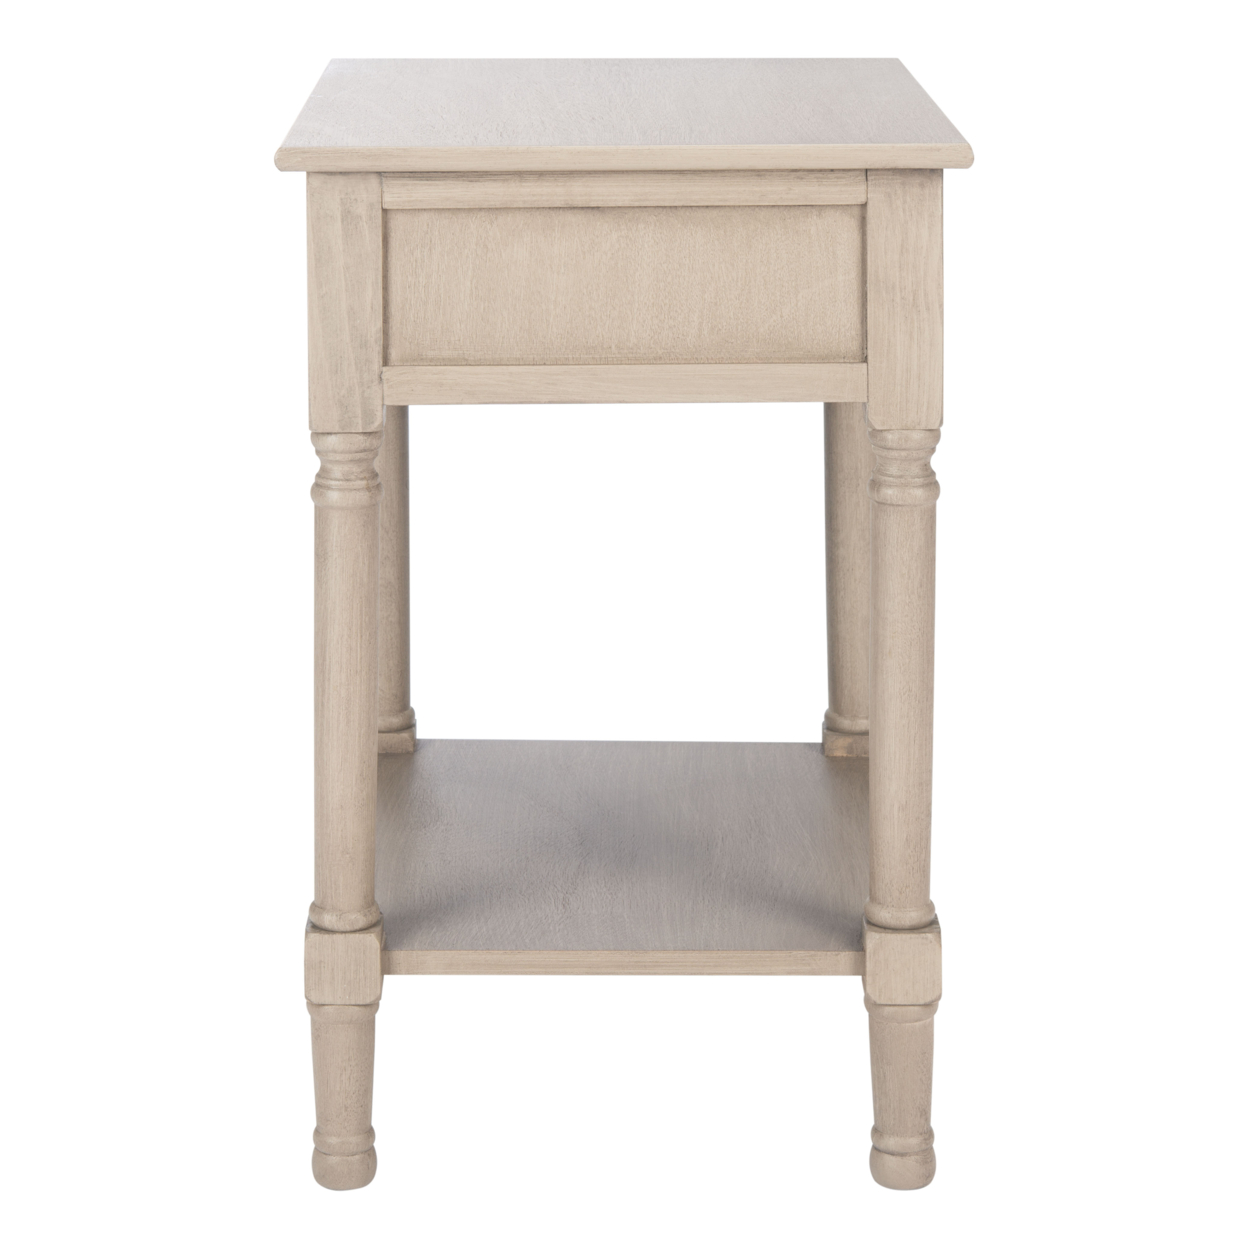 SAFAVIEH Tate 1-Drawer Accent Table Greige